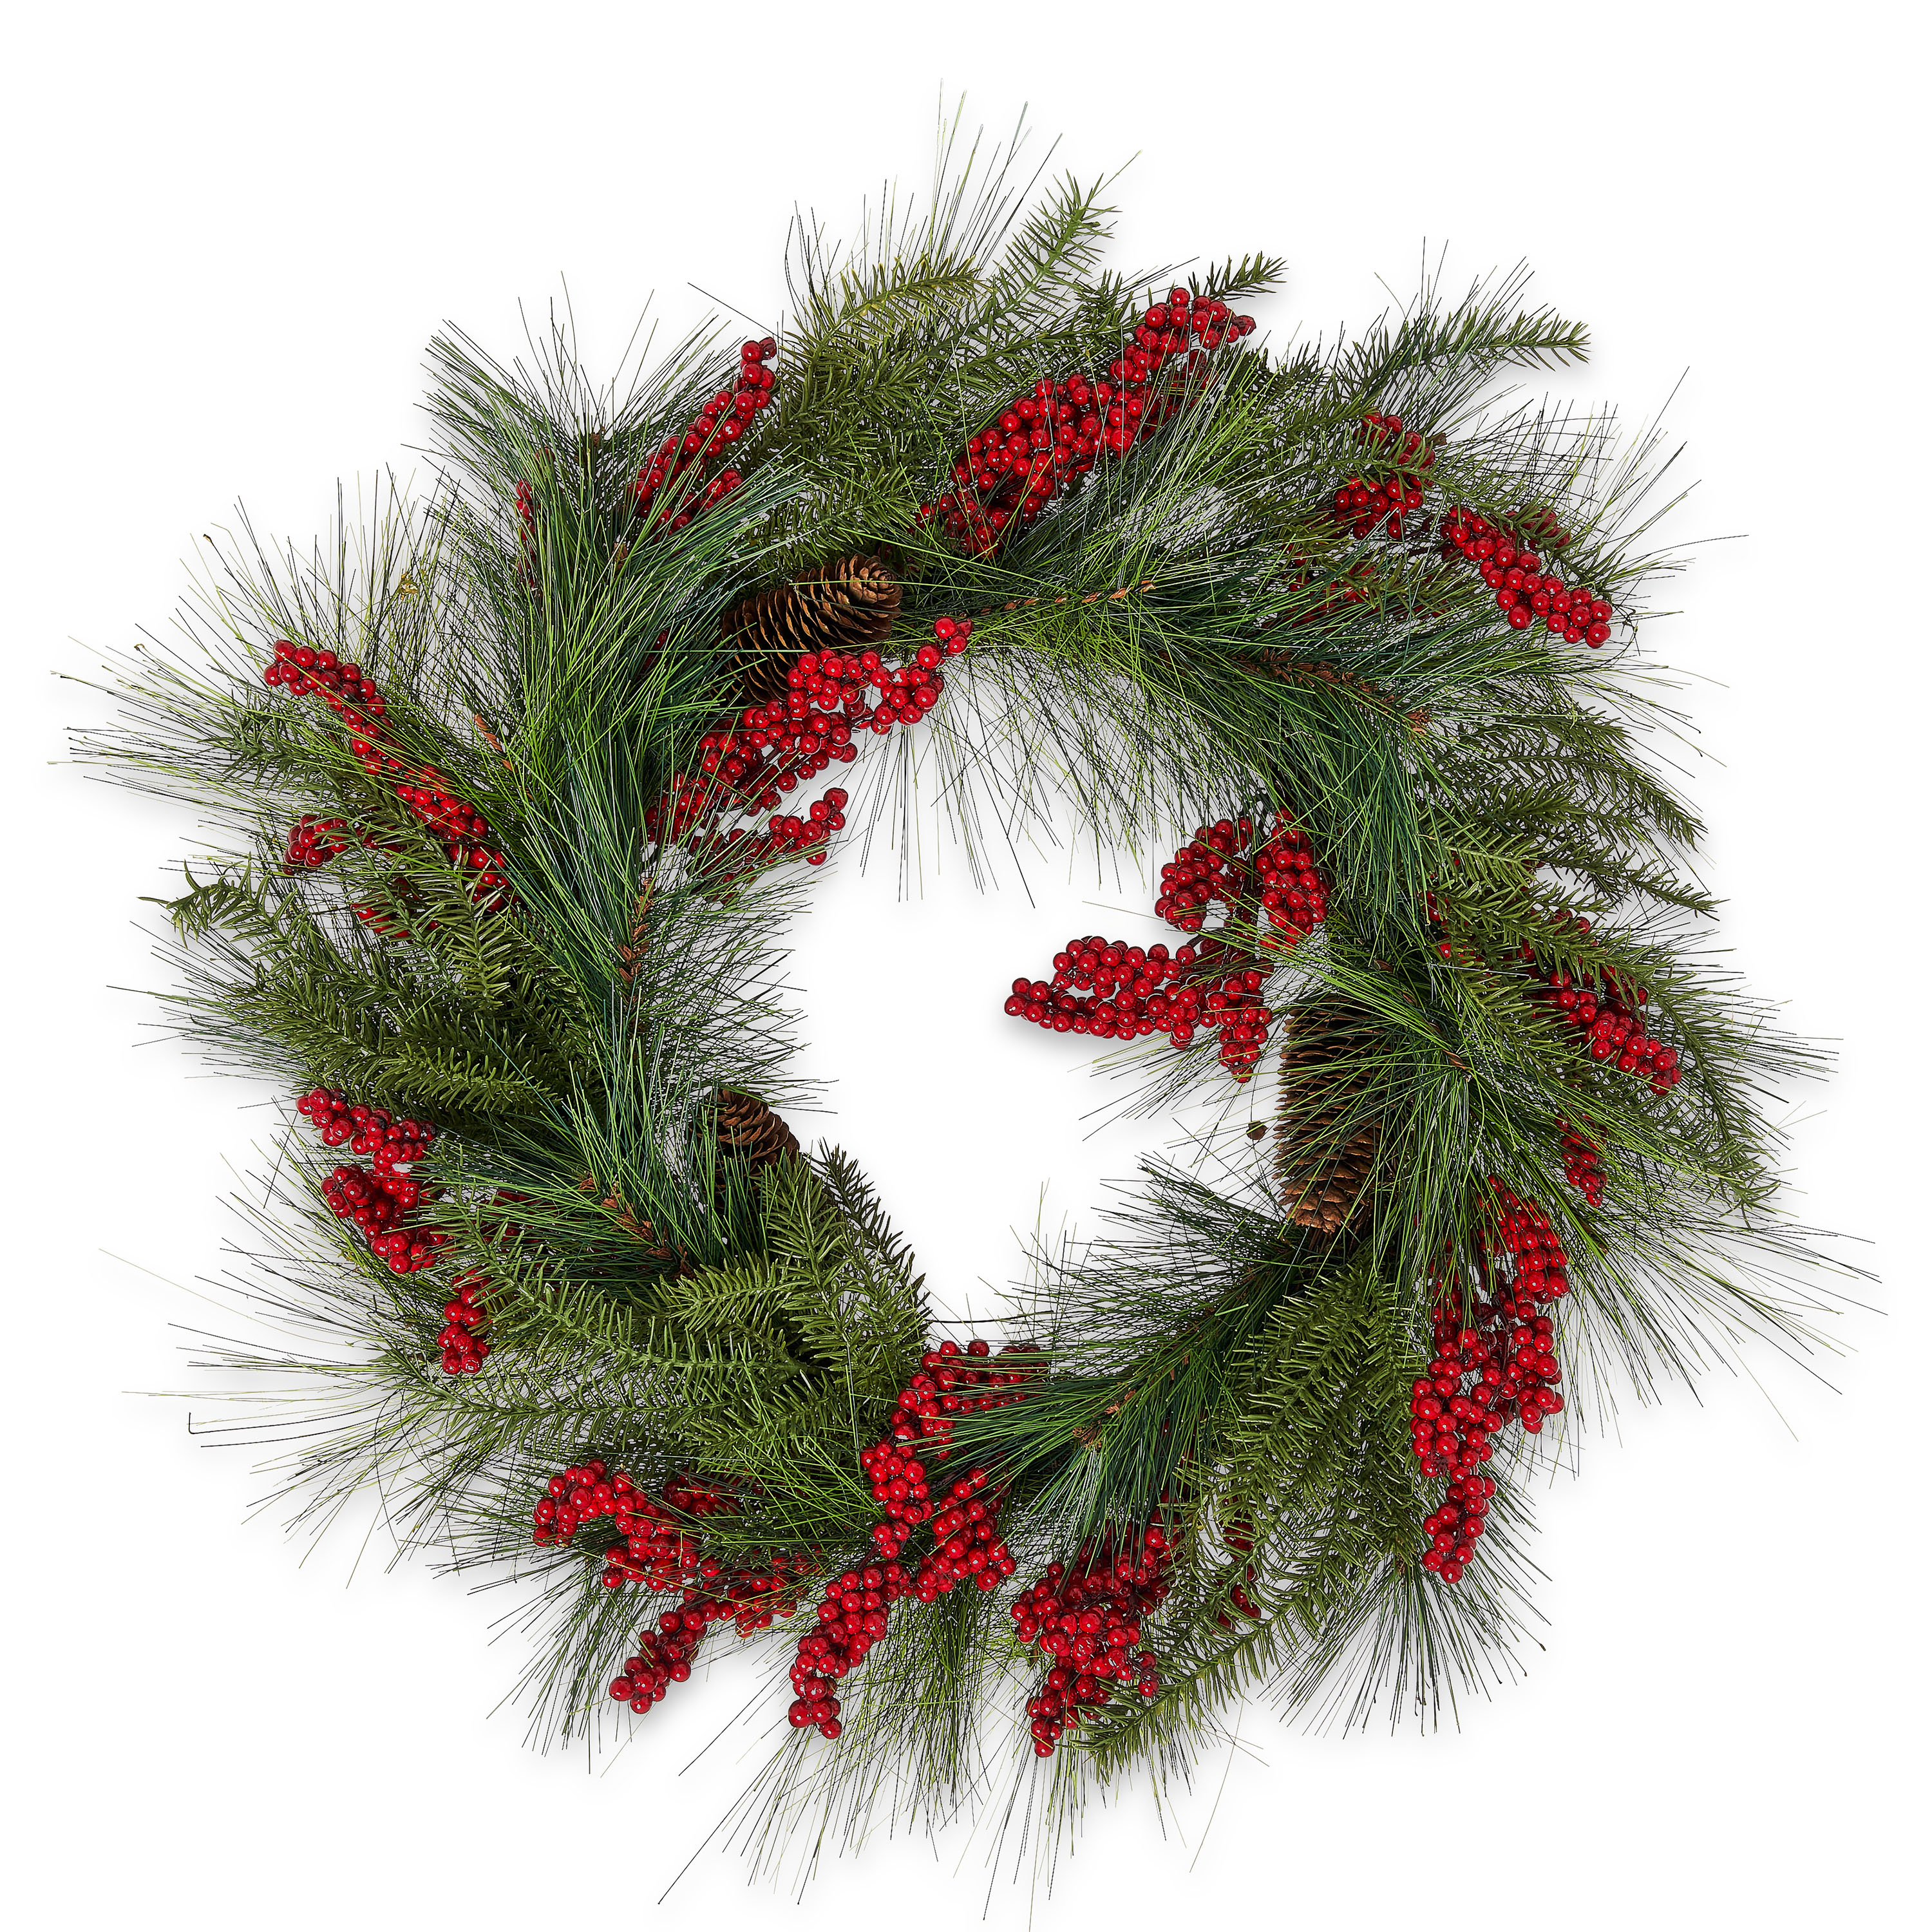 Holiday Time Red Berry Evergreen Christmas Wreath, 22 Inch - image 1 of 6